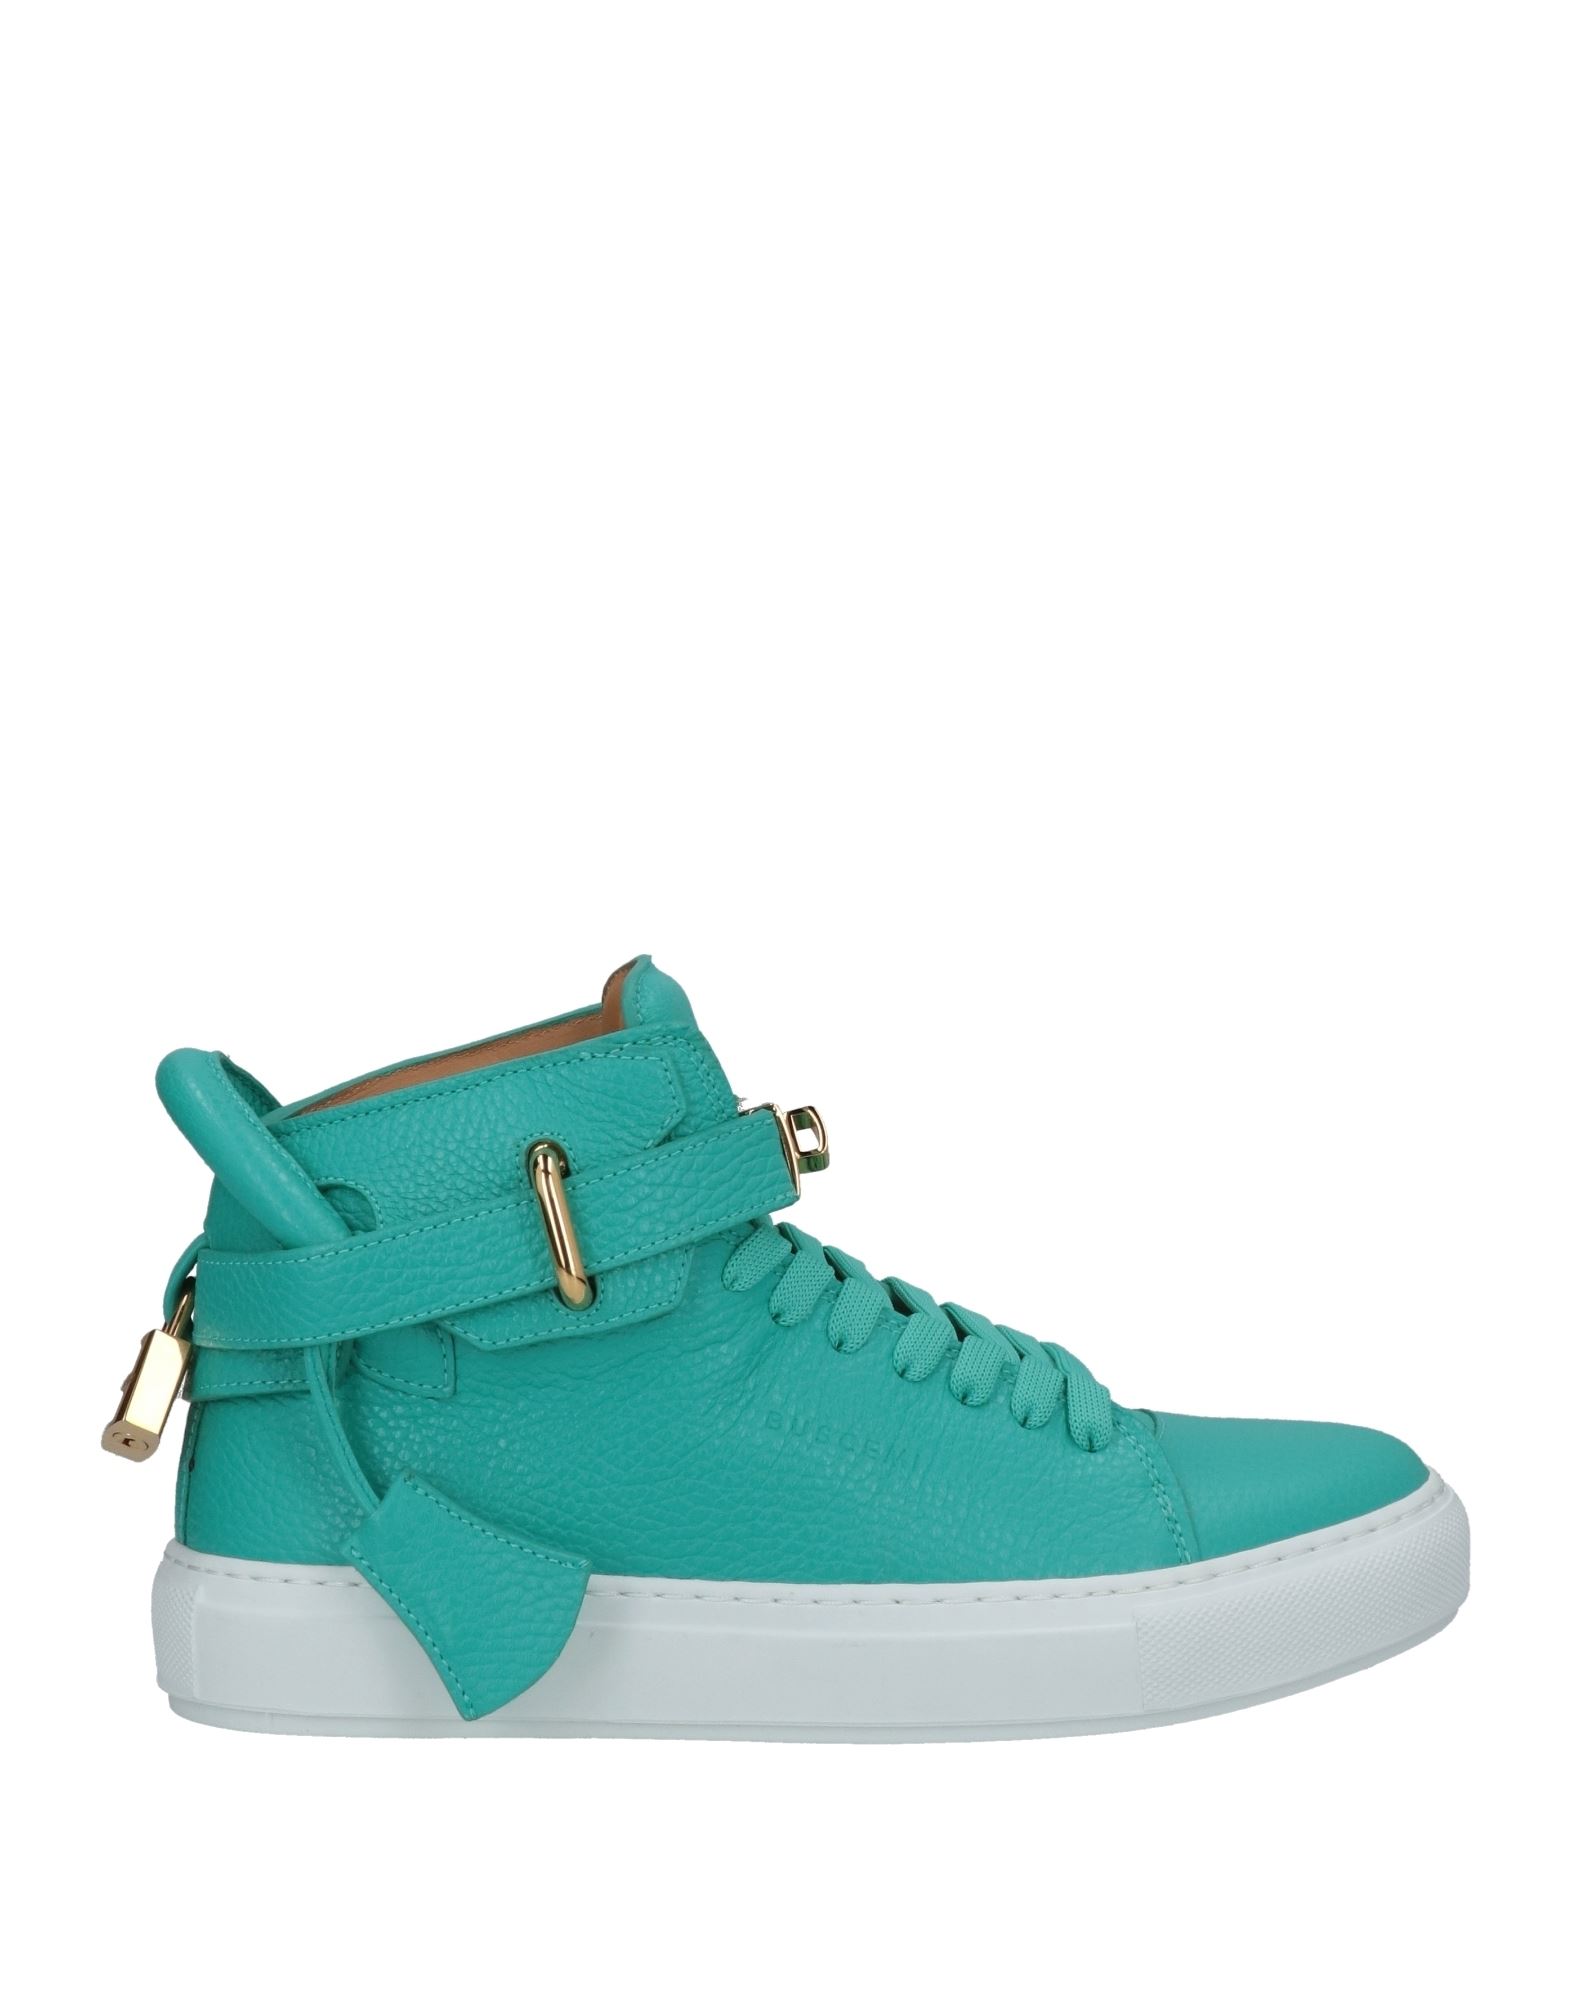 Buscemi Sneakers In Turquoise